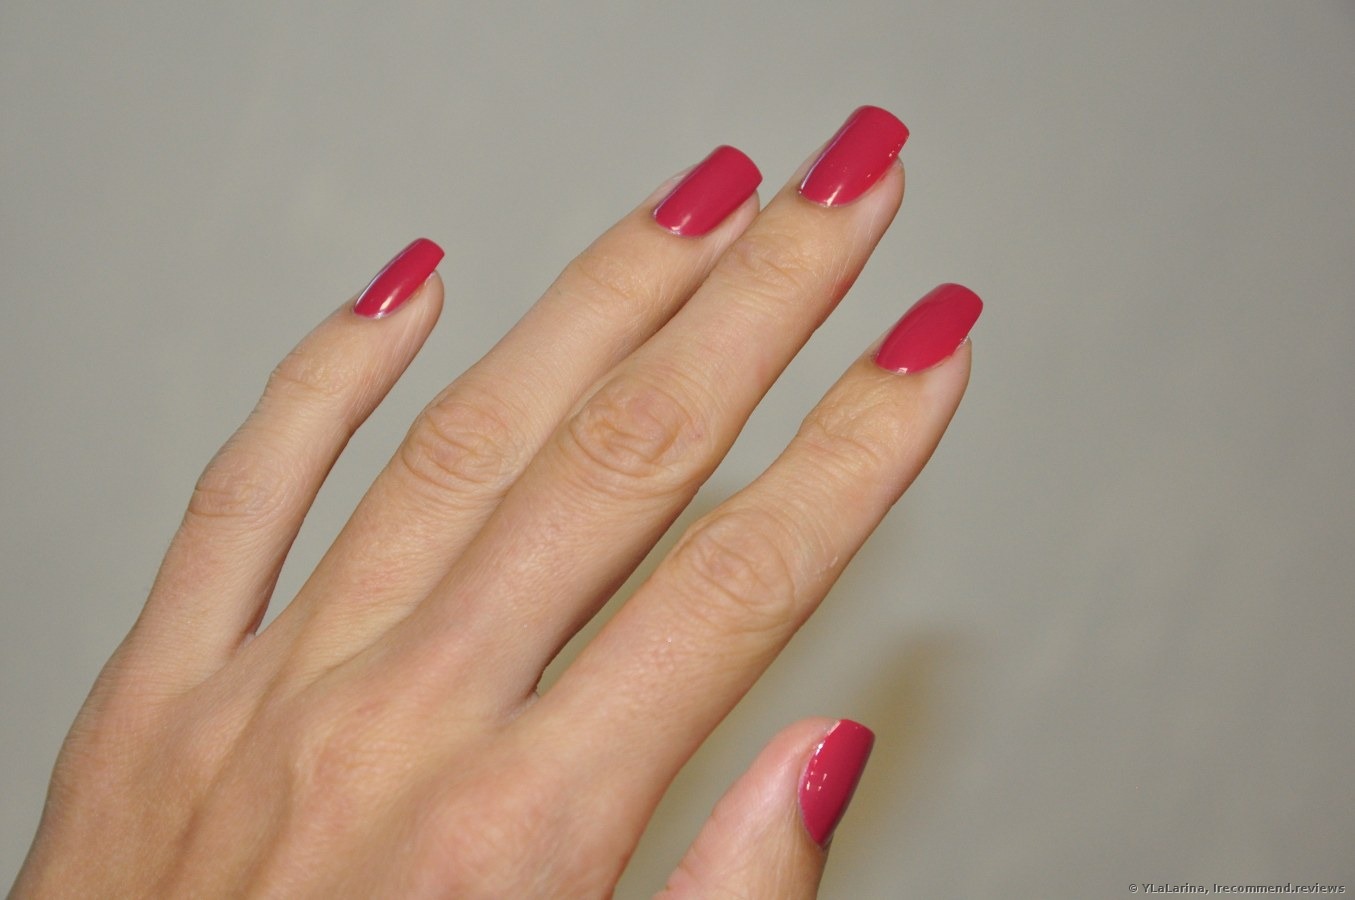 9. Orly Nail Lacquer in "Cotton Candy" - wide 5